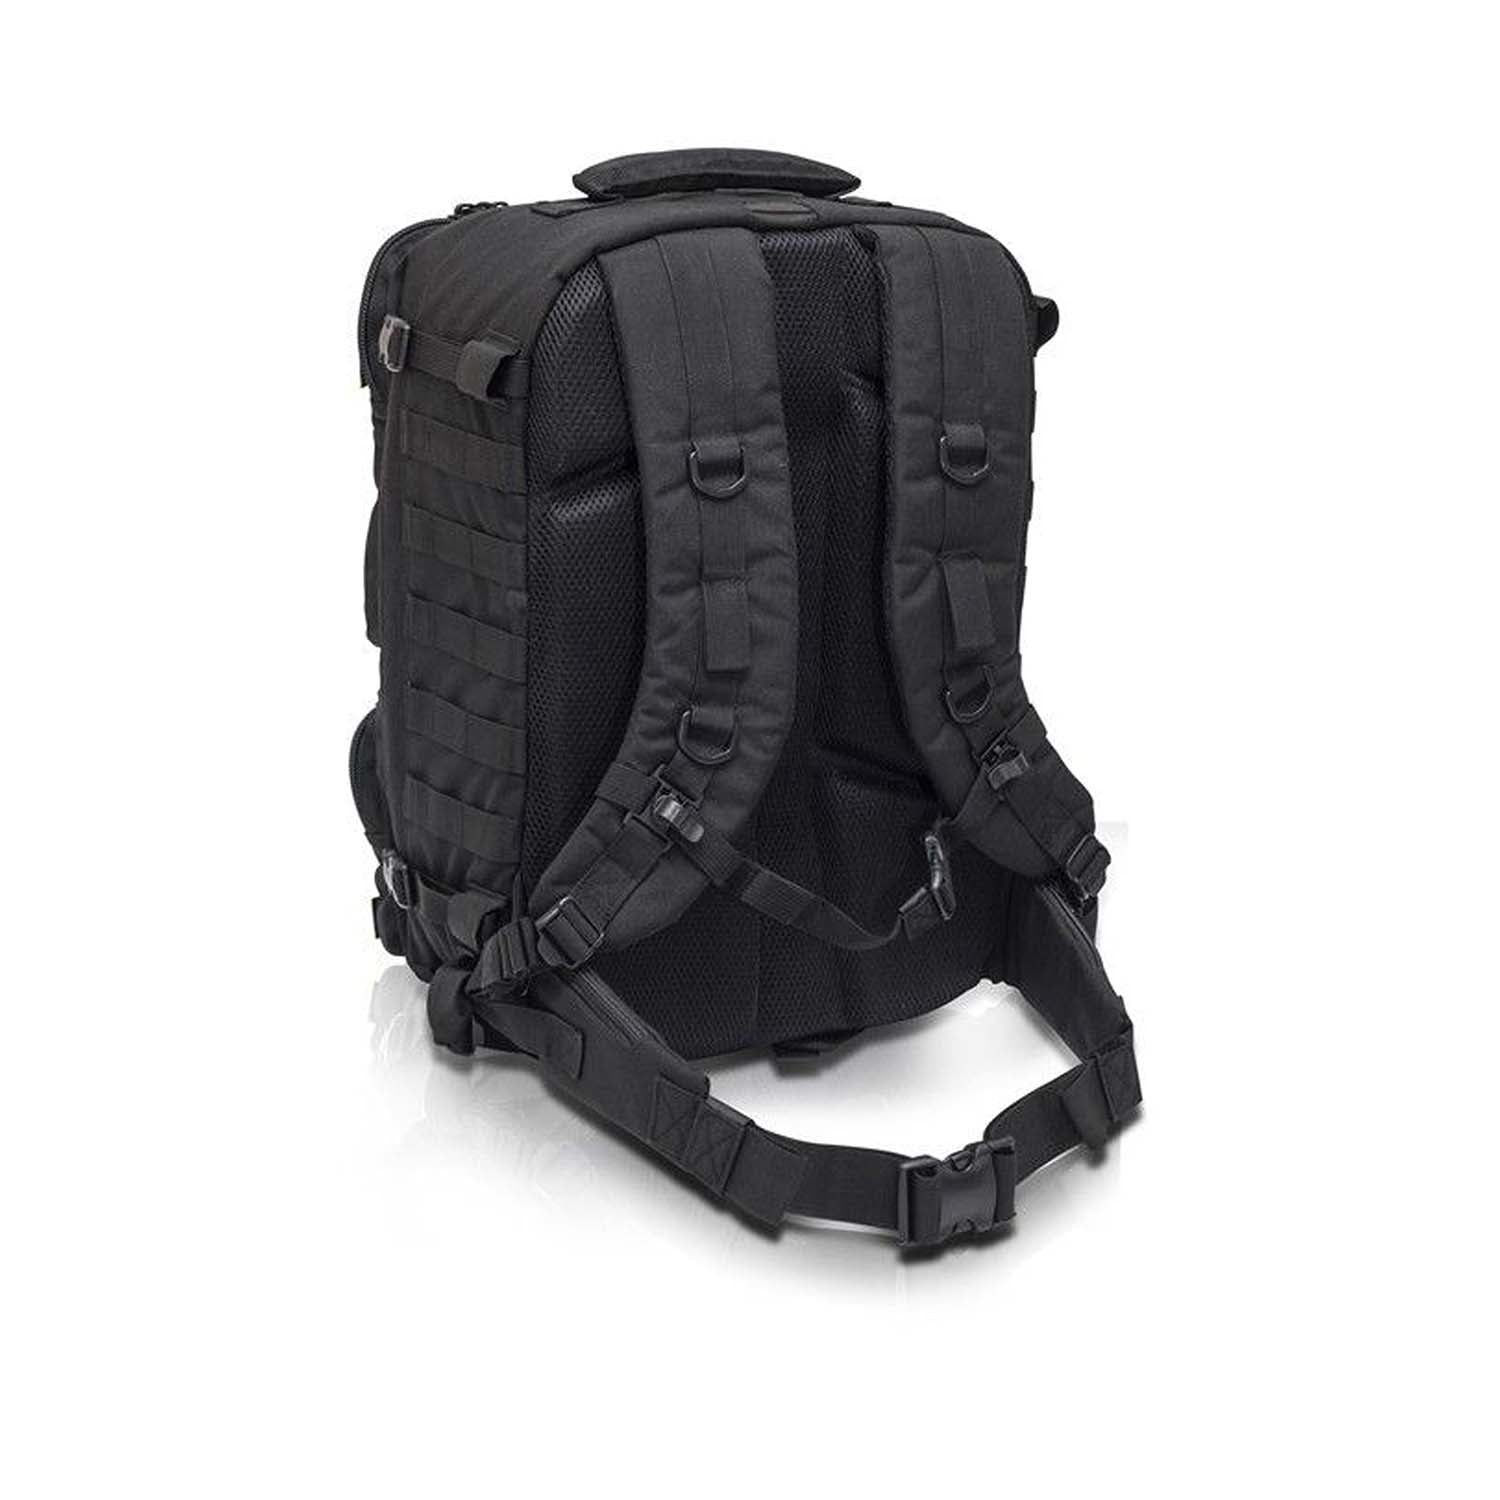 Paramed's Tactical Rescue Backpack | Black (1)